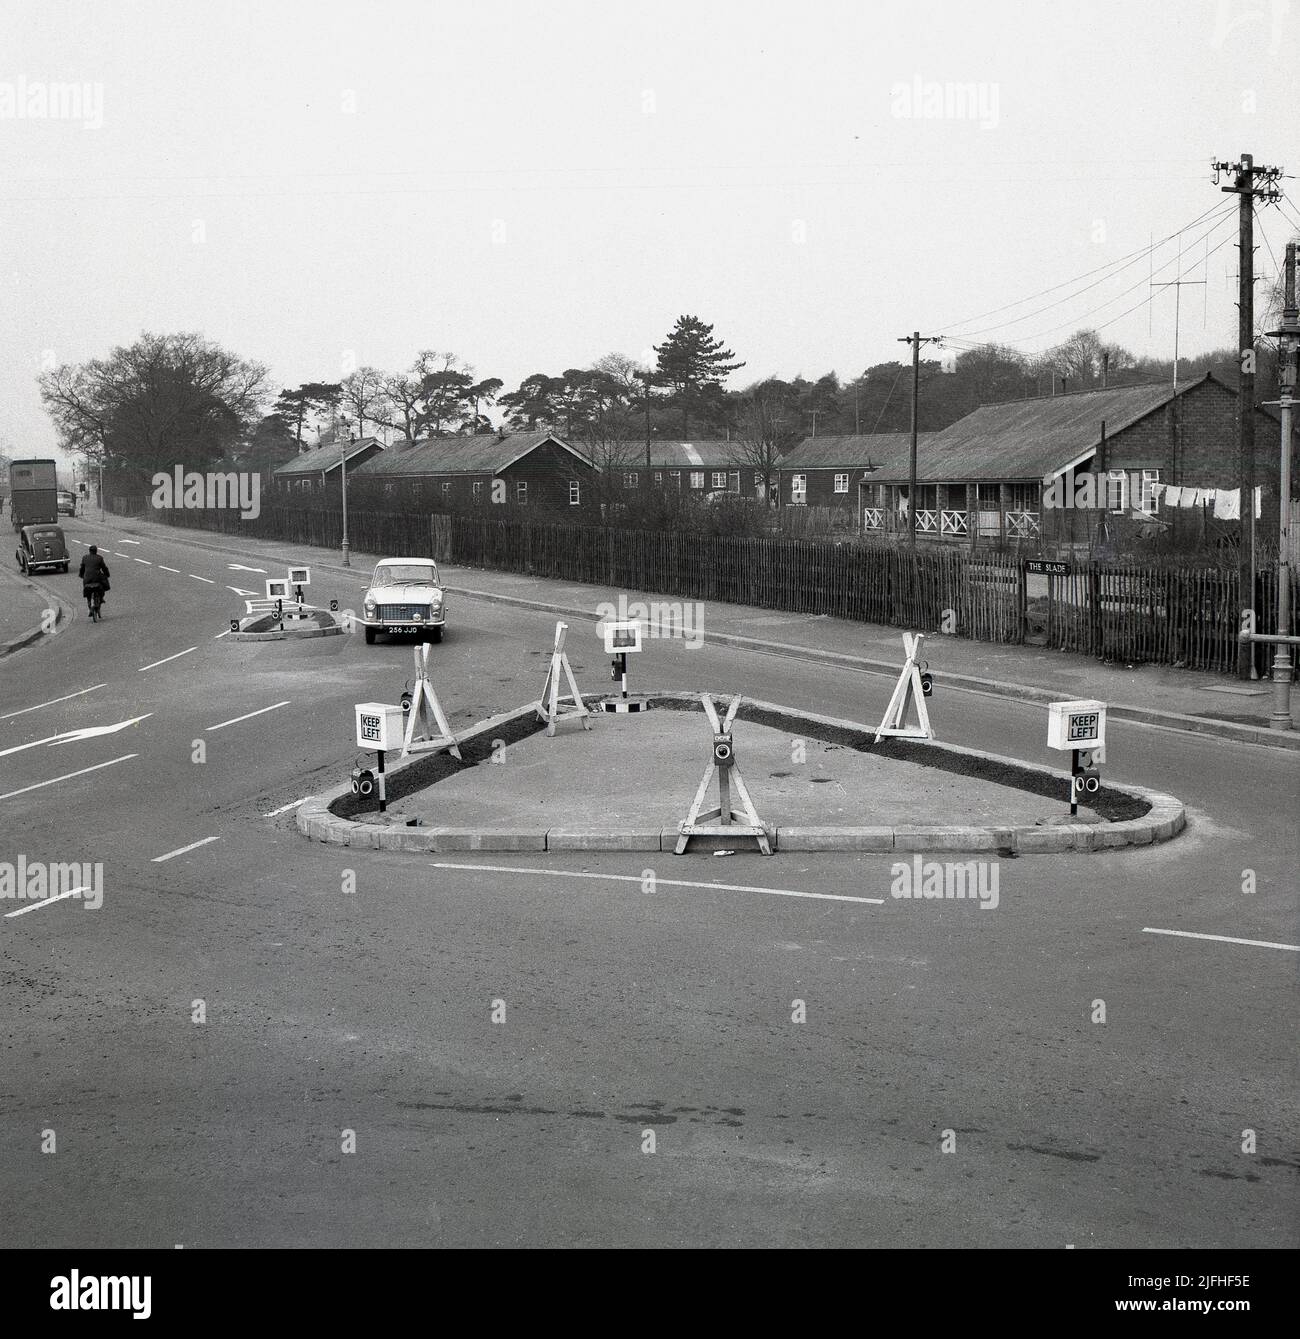 1960s, historical, newly built triangular road lay-out or junction on Slade Rd, Oxford, England, UK. Seen in the picture on the right are the former Army camps off The Slade which provided much-needed housing for families in the post-war period. Stock Photo